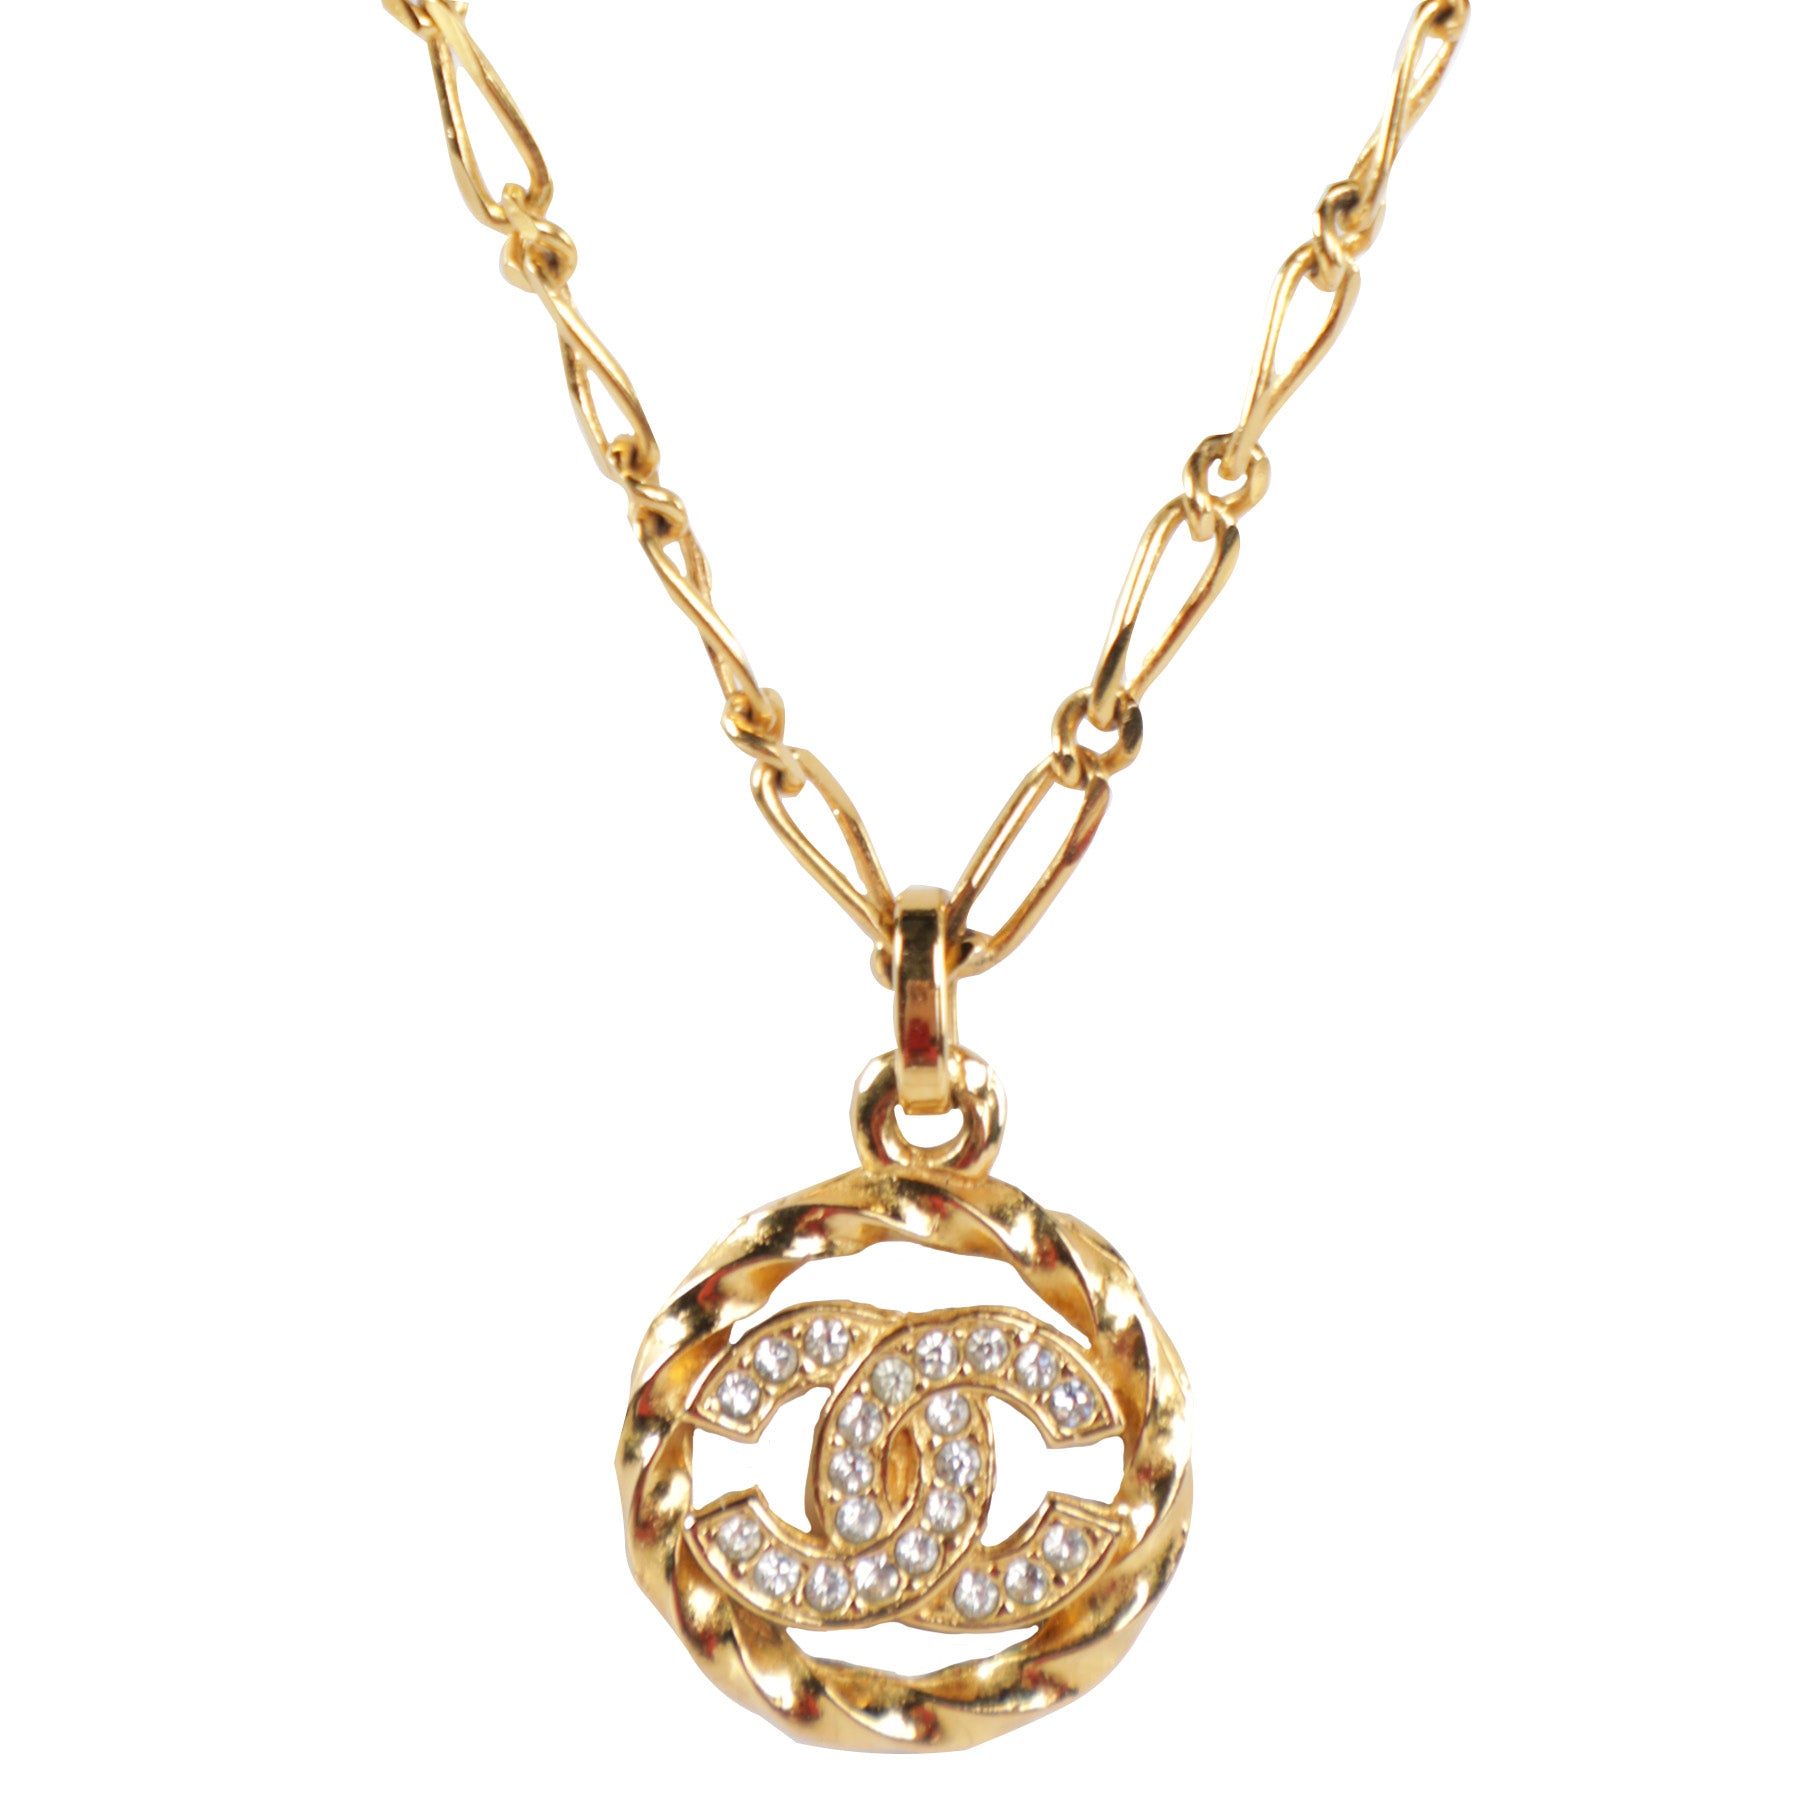 AUTH CHANEL CC LOGO CHAIN NECKLACE WITH IMITATION PEARLS GOLD METAL PEARL  WHITE  eBay